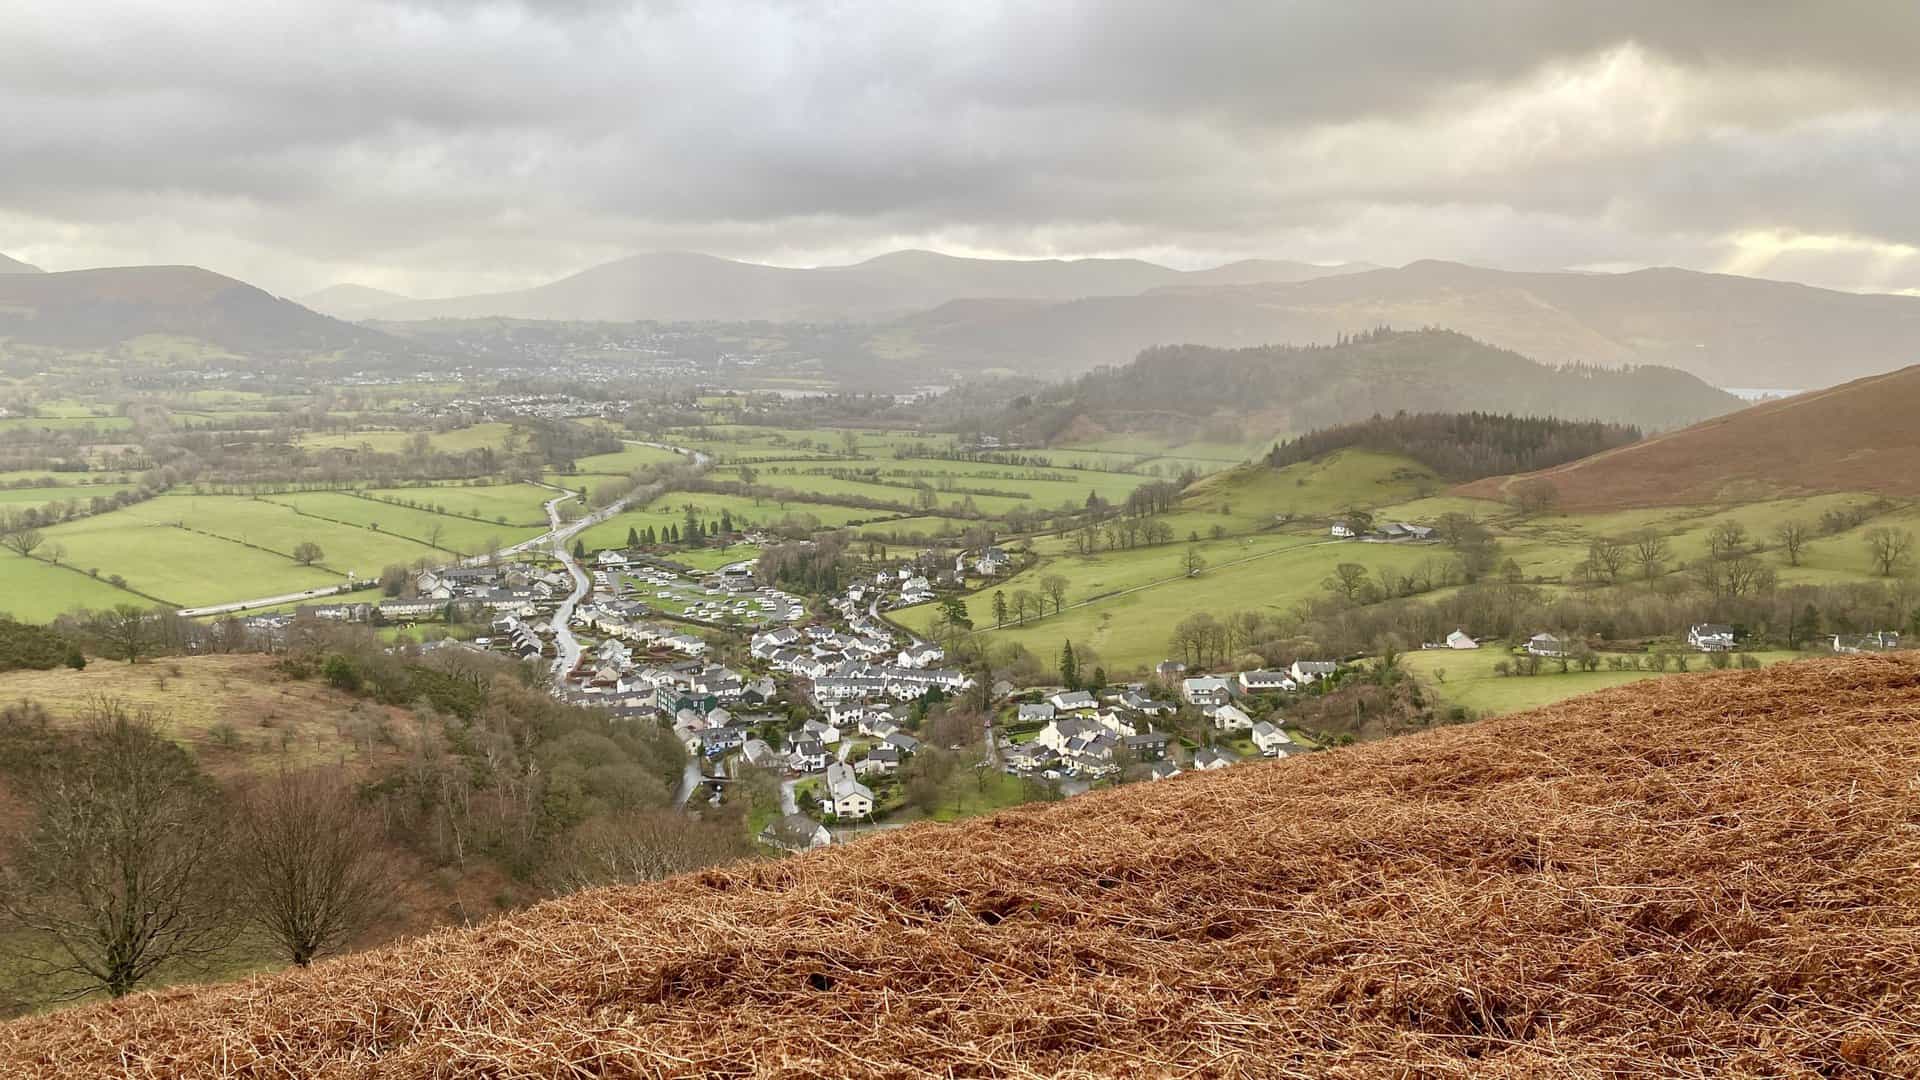 Looking down upon the village of Braithwaite. Even at a height of only 240 metres the views are magnificent.